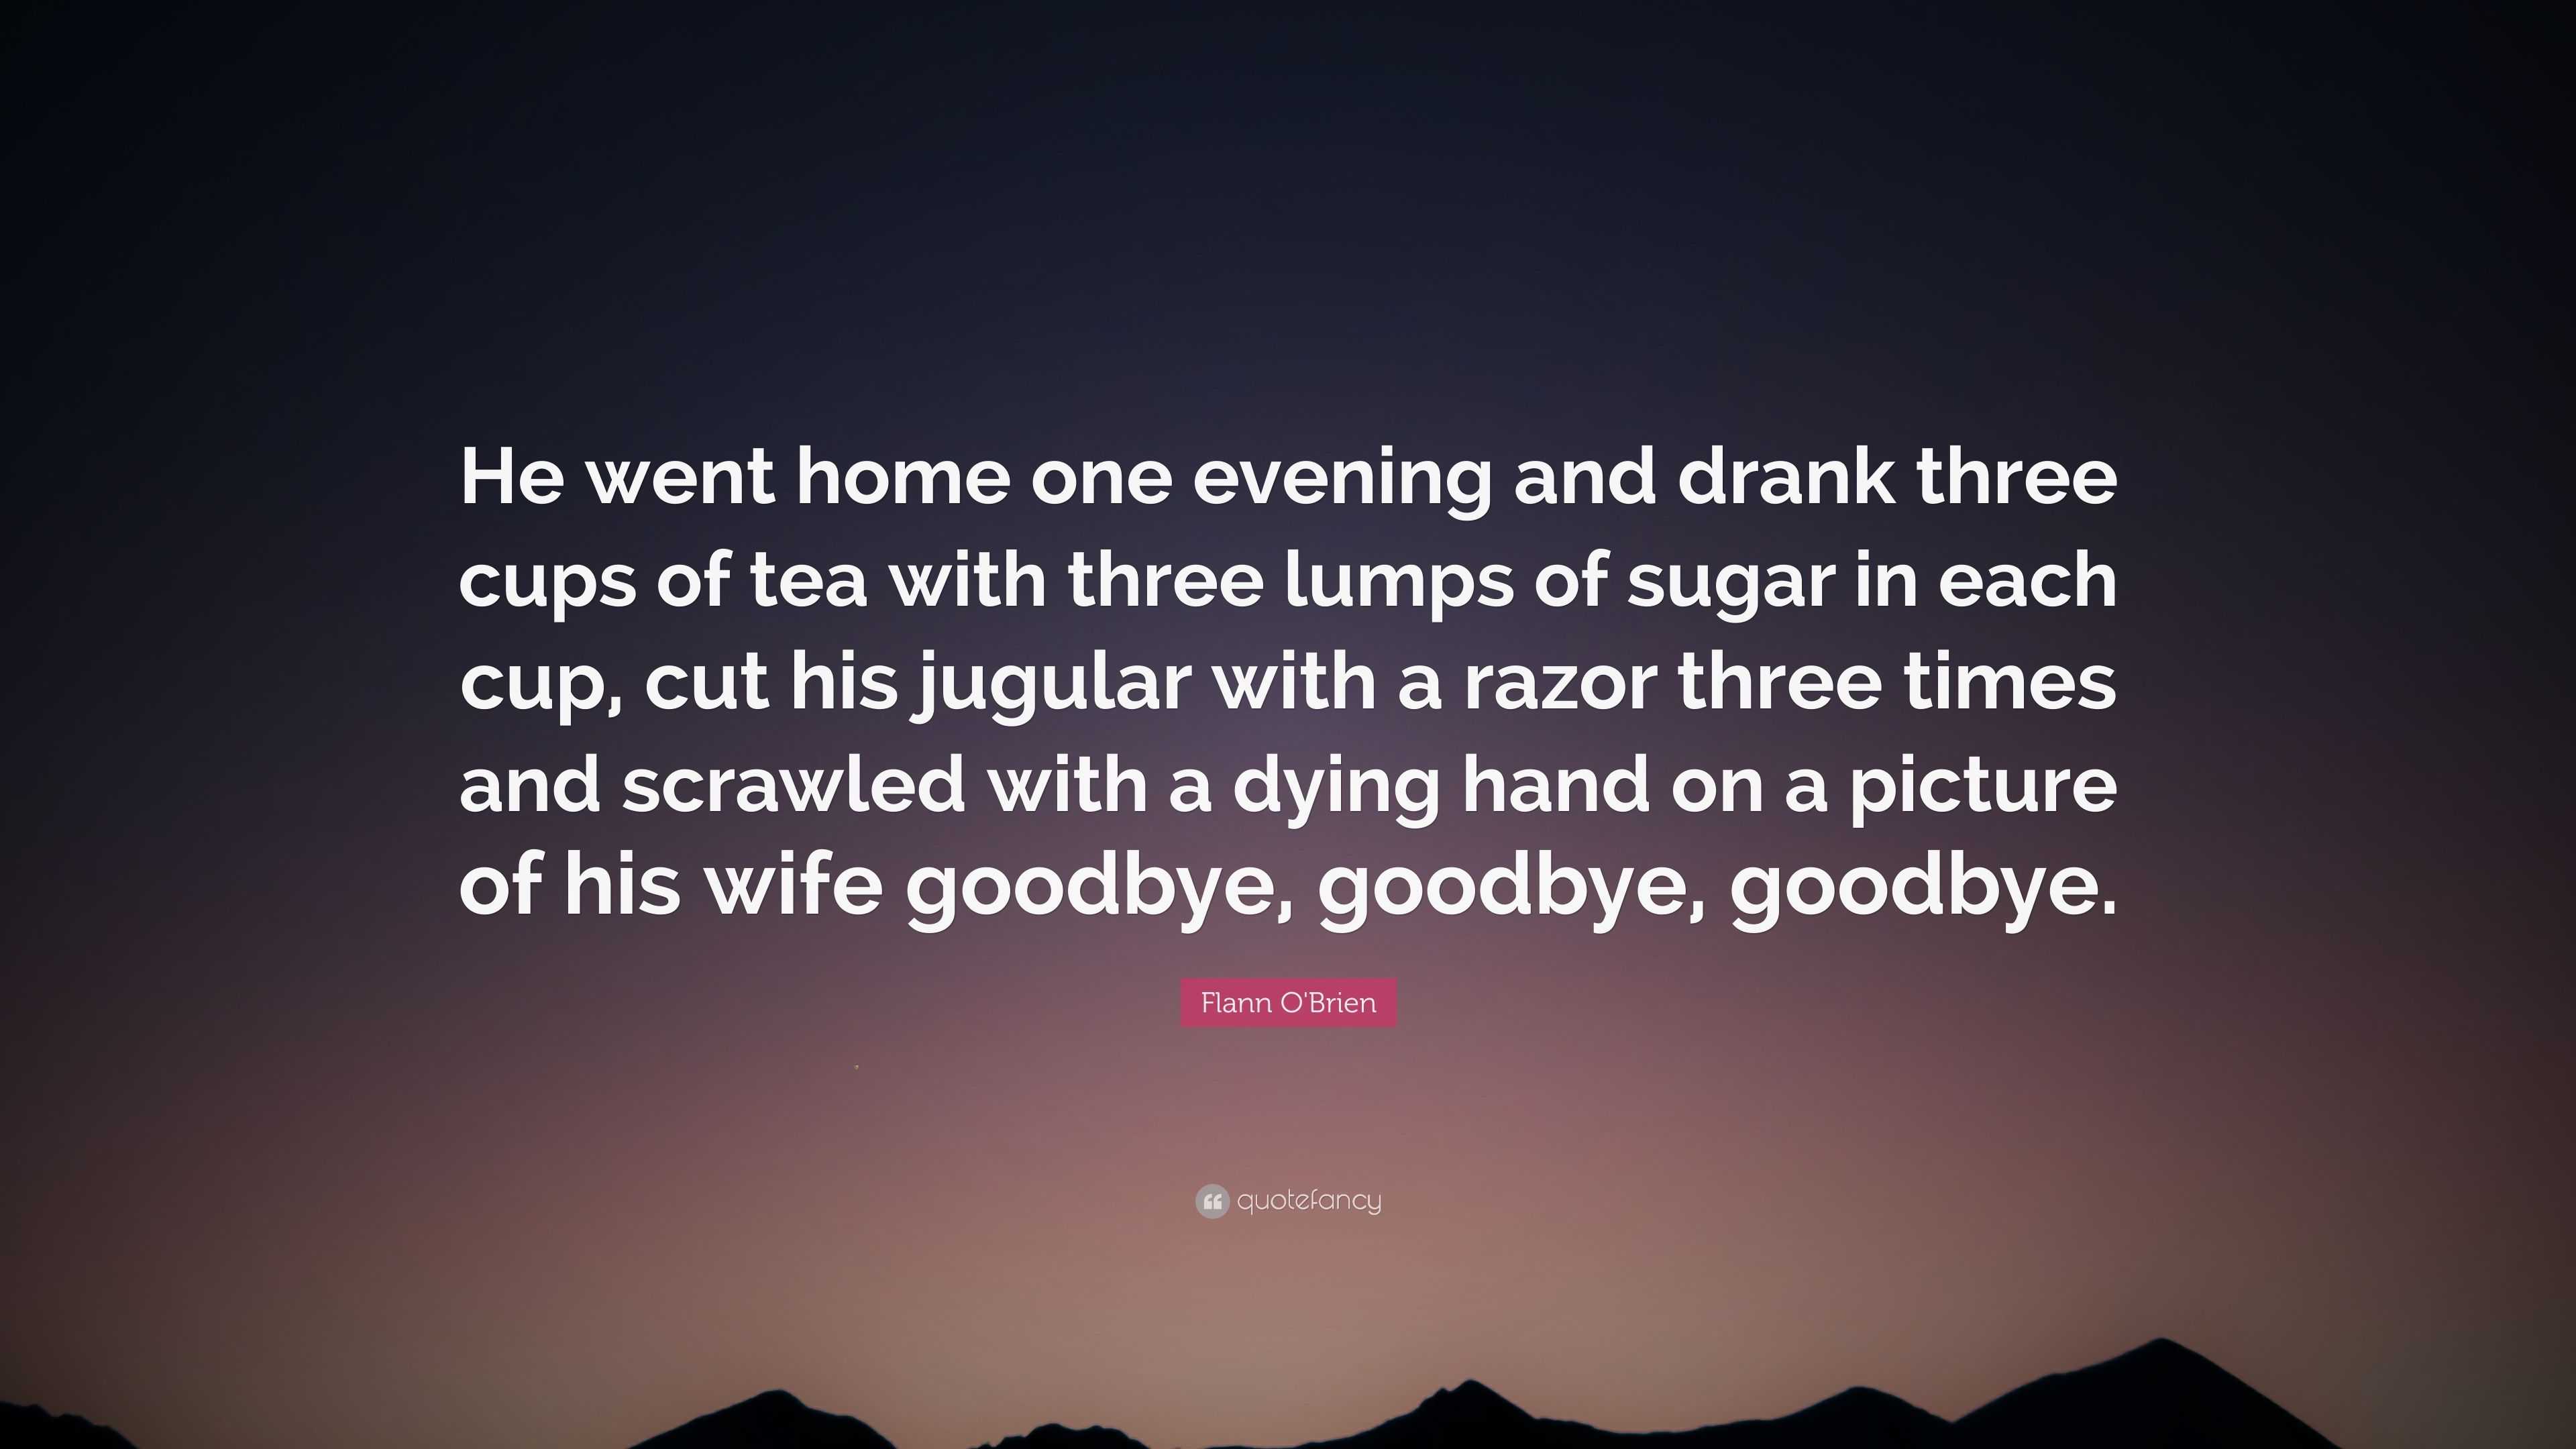 https://quotefancy.com/media/wallpaper/3840x2160/2913025-Flann-O-Brien-Quote-He-went-home-one-evening-and-drank-three-cups.jpg